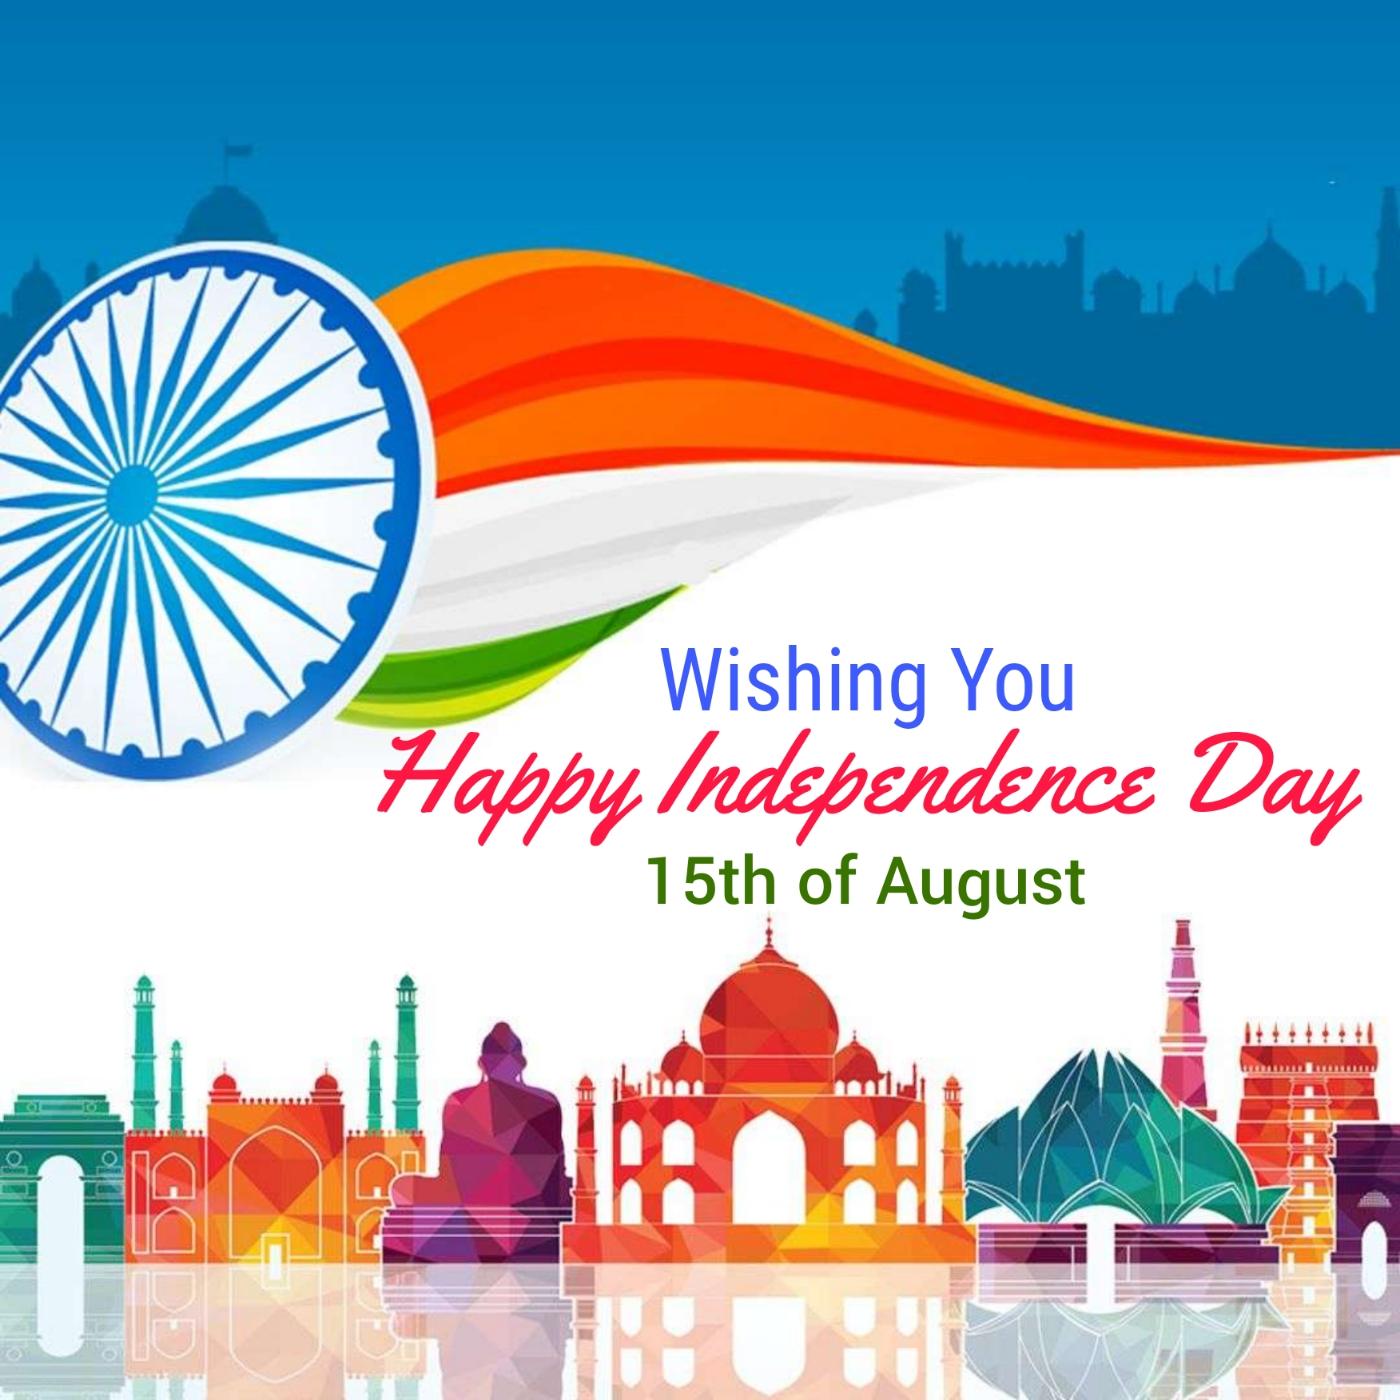 Wishing You Happy Independence Day 15th of August Images